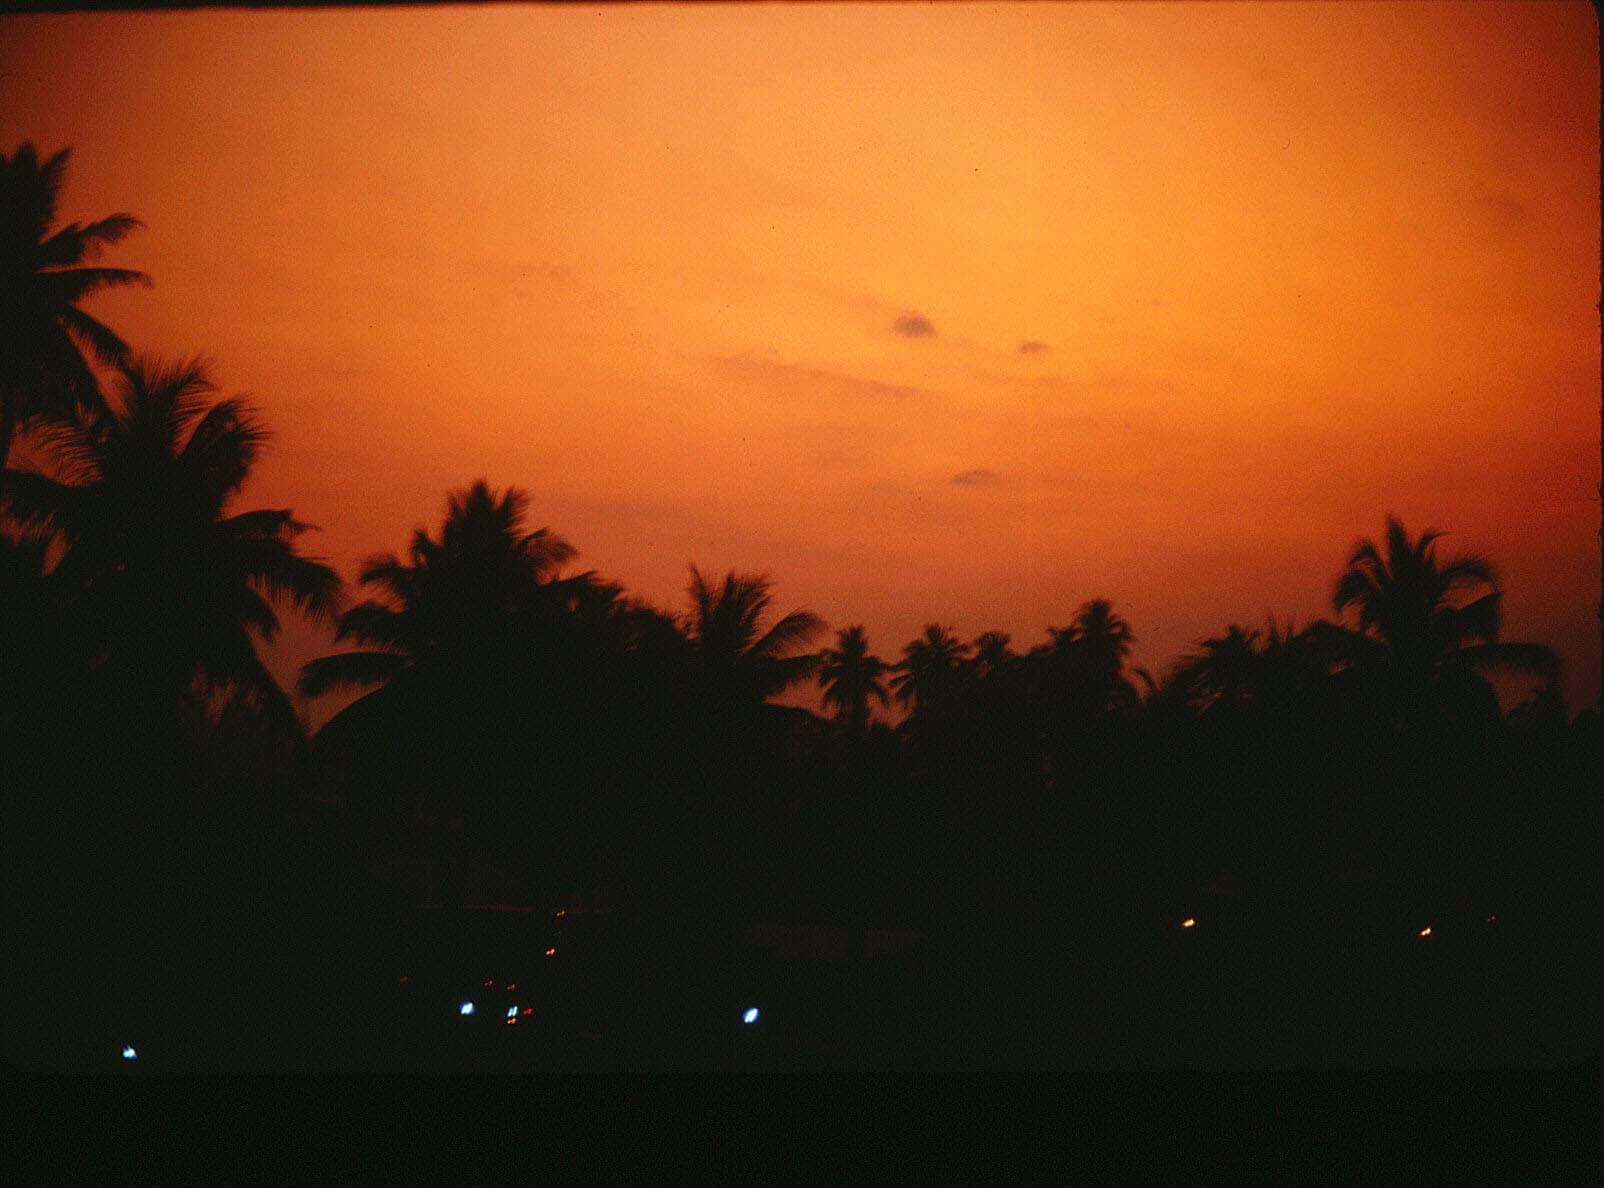 Black silhouettes of palm trees and buildings against a bright orange sky.